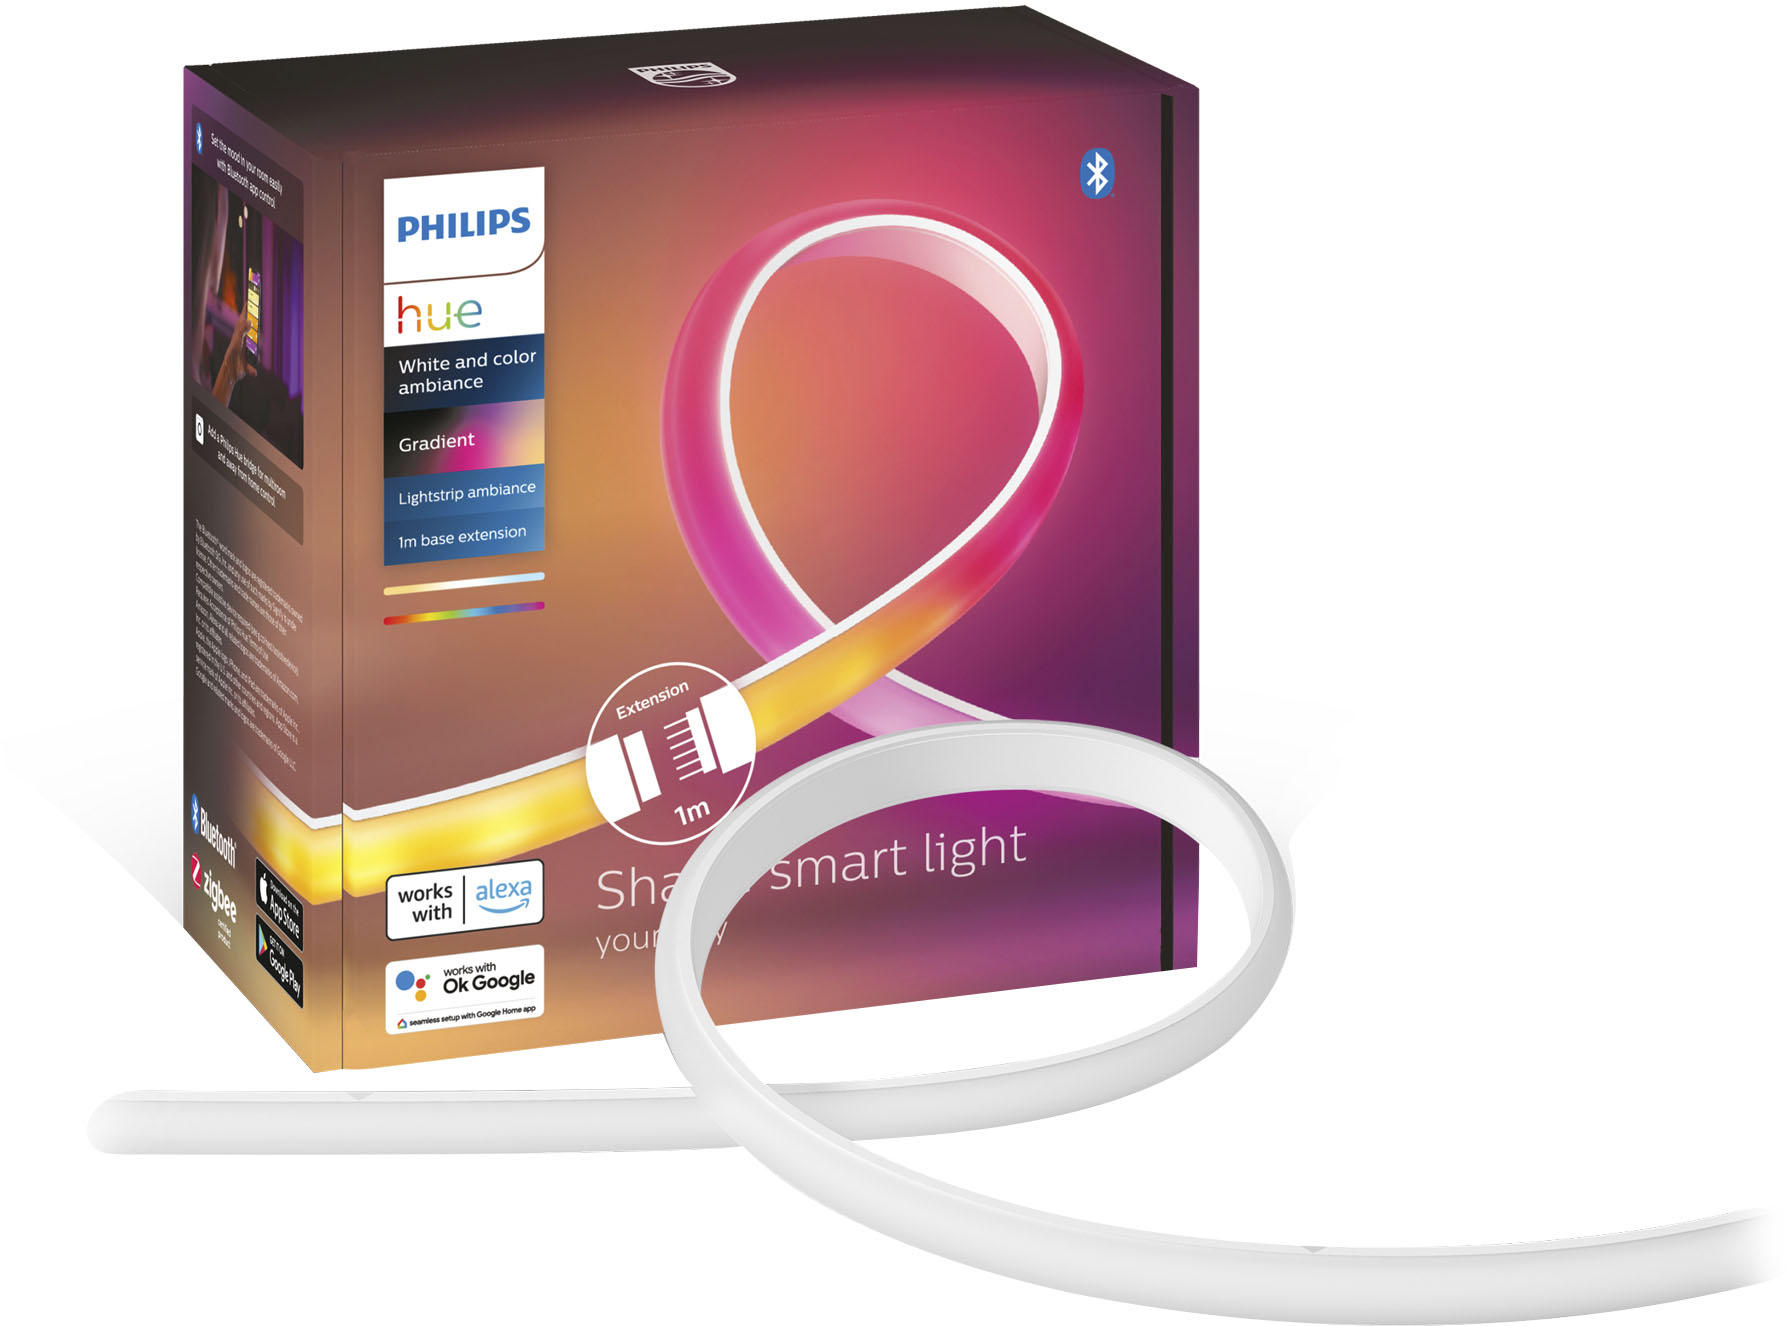 Angle View: Philips - Geek Squad Certified Refurbished Hue Ambiance Gradient Lightstrip Extension